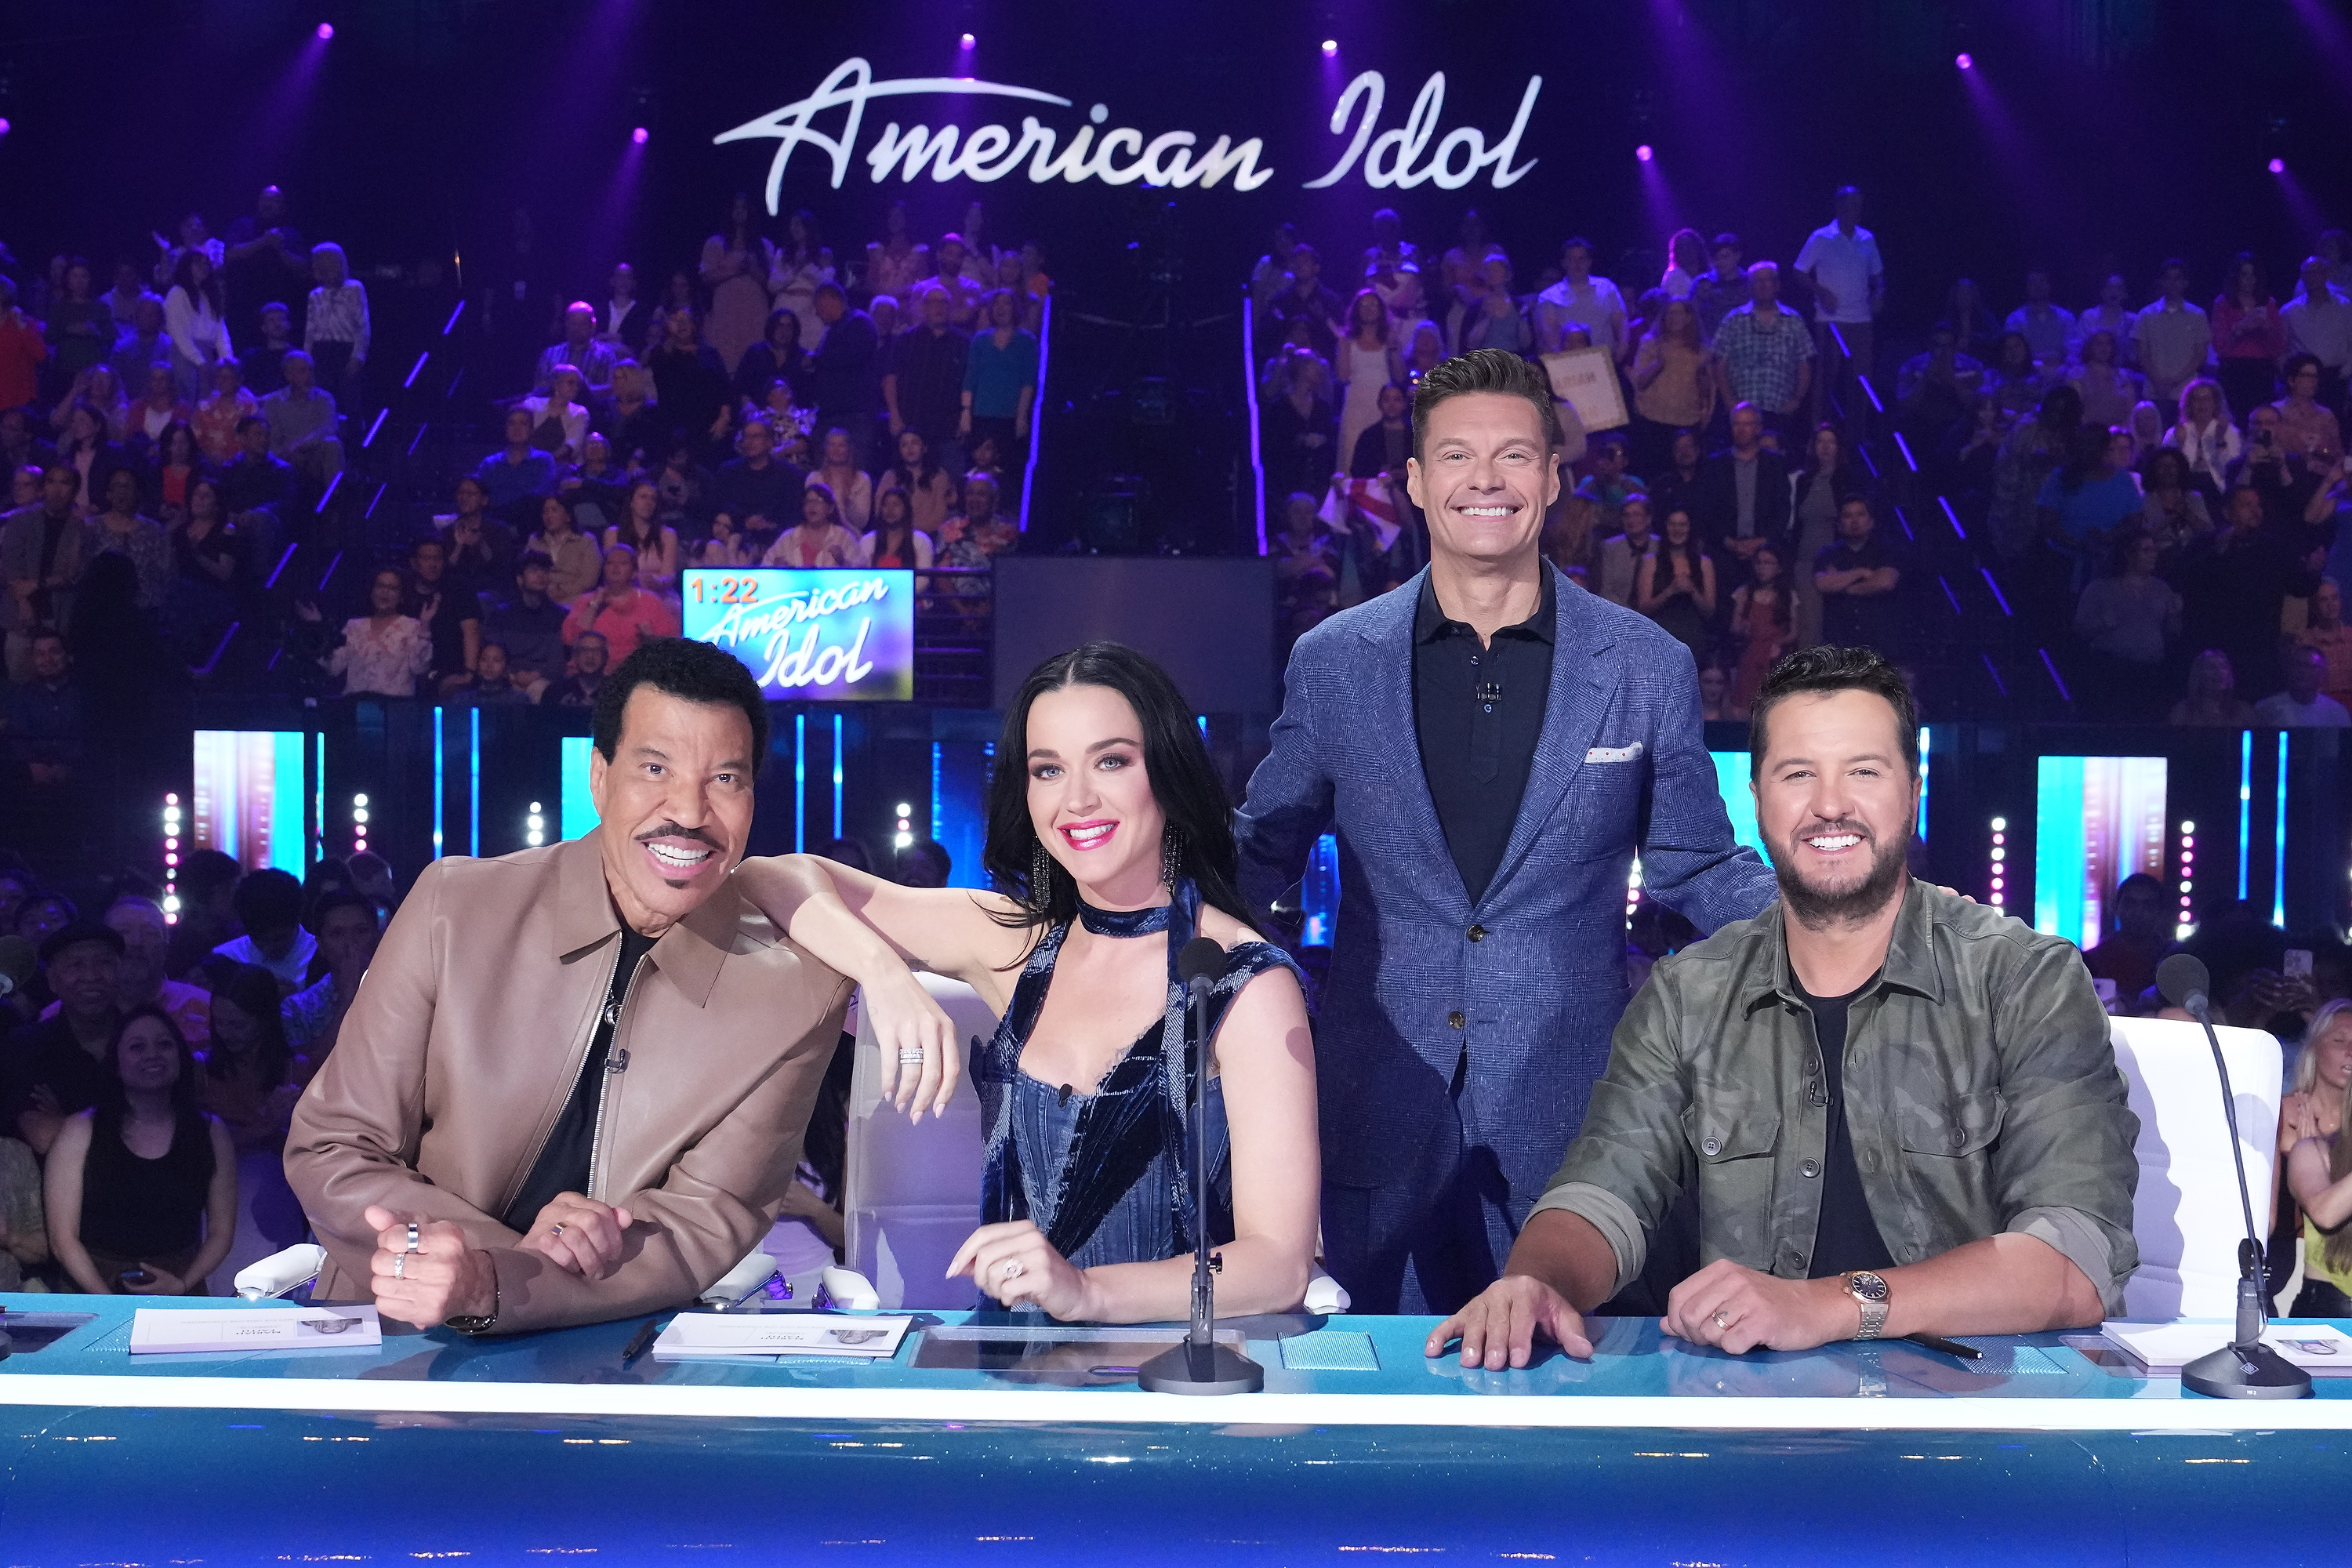 Katy with fellow American Idol judges Lionel Richie and Luke Bryan and show host, Ryan Seacrest